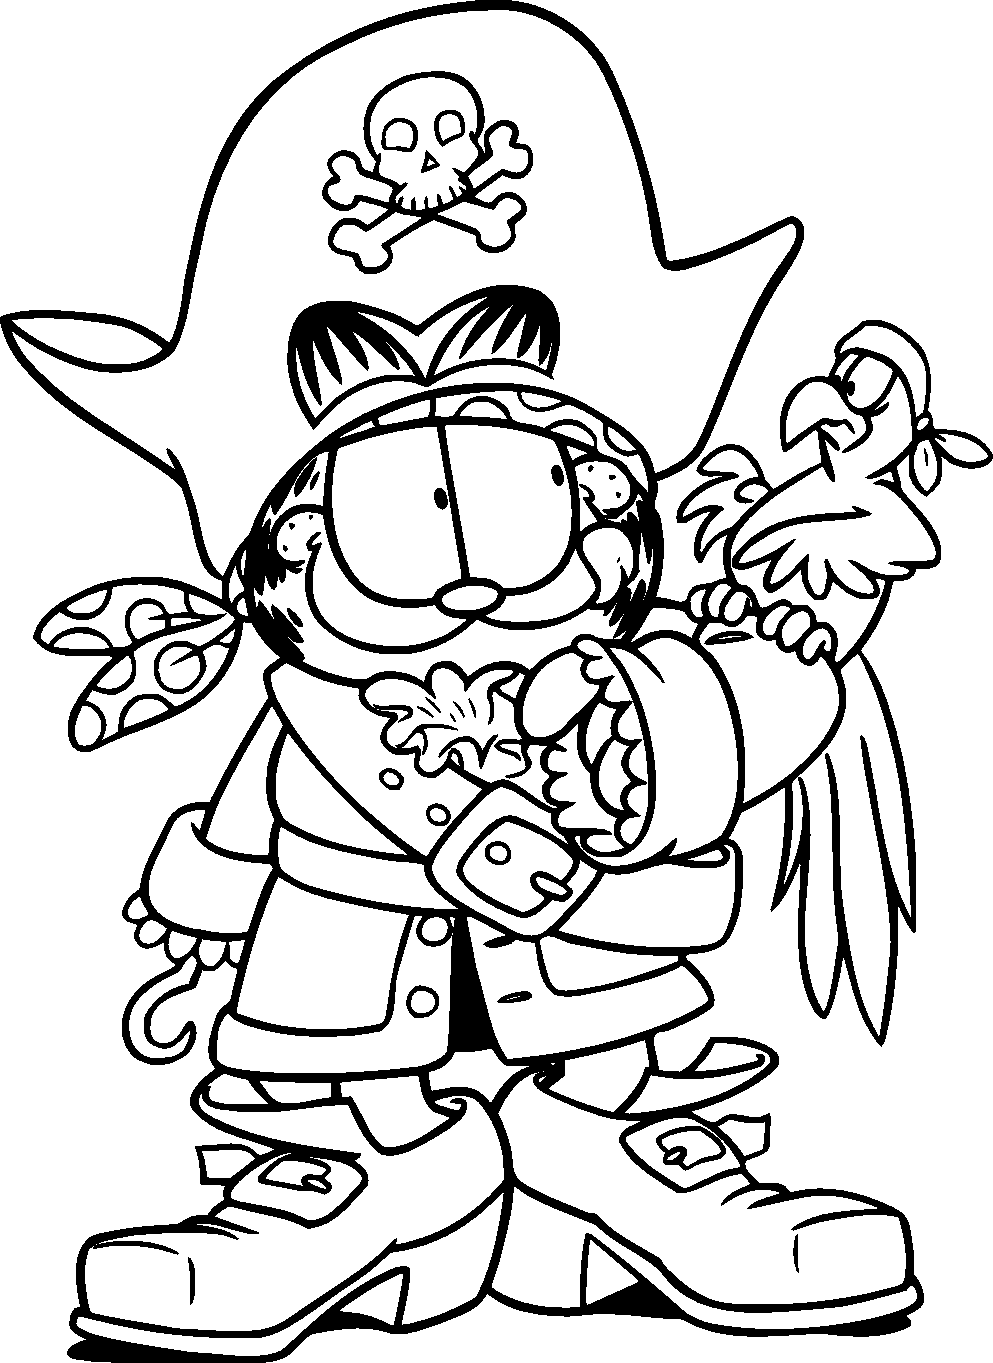 garfield color pages garfield coloring pages to download and print for free garfield color pages 